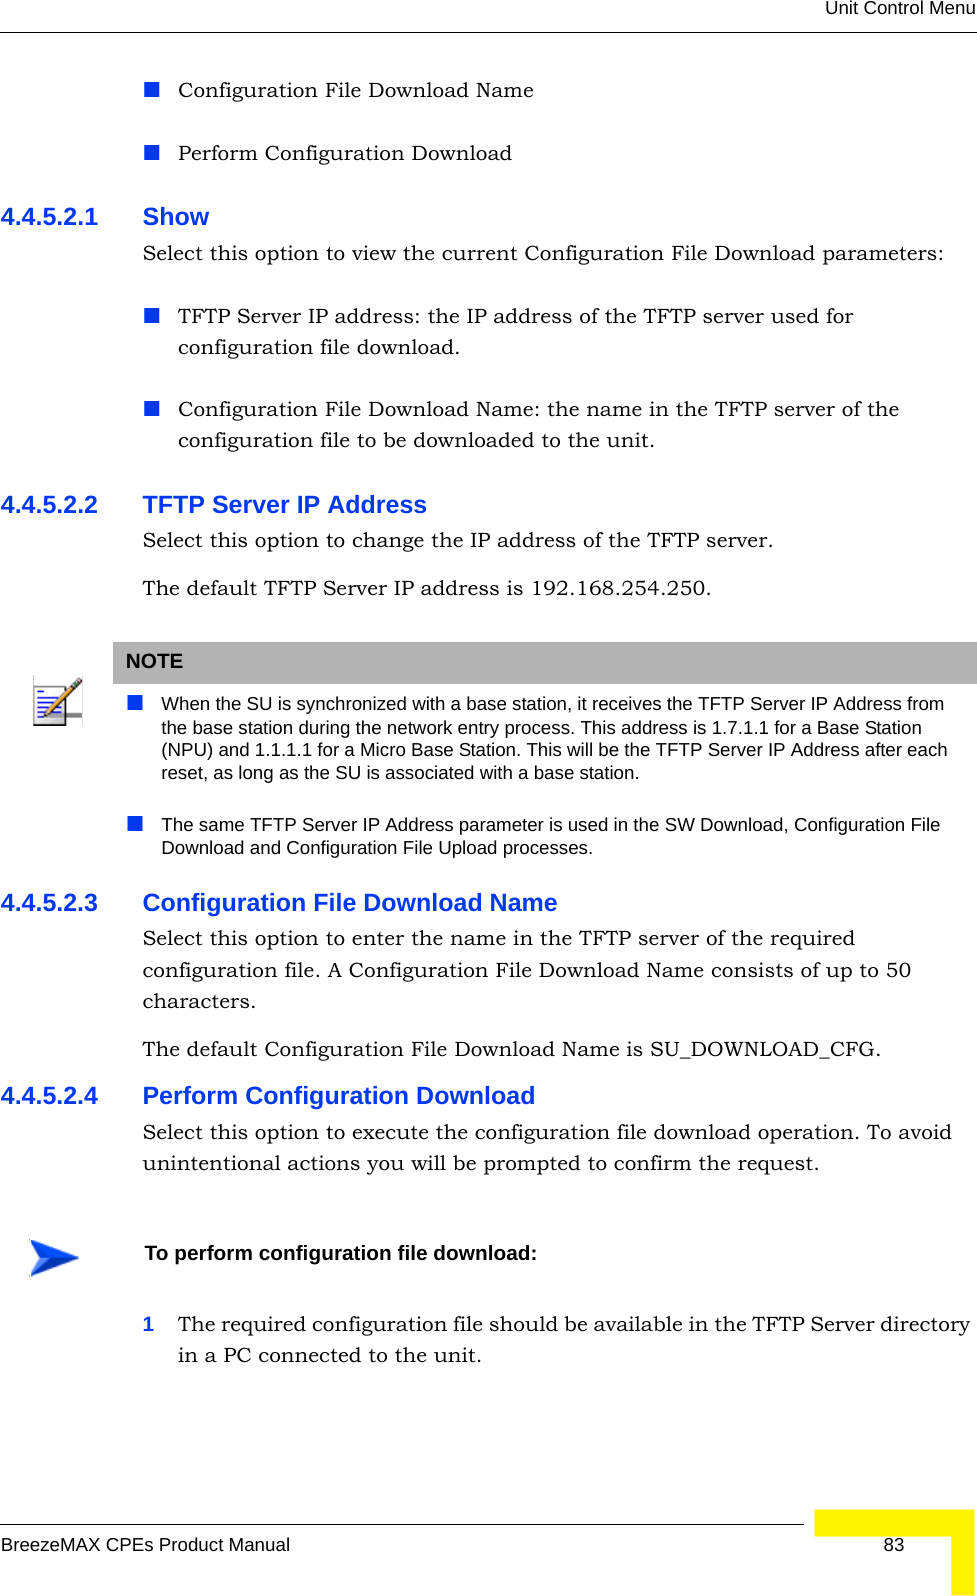 Unit Control MenuBreezeMAX CPEs Product Manual 83Configuration File Download NamePerform Configuration Download4.4.5.2.1 Show Select this option to view the current Configuration File Download parameters:TFTP Server IP address: the IP address of the TFTP server used for configuration file download.Configuration File Download Name: the name in the TFTP server of the configuration file to be downloaded to the unit.4.4.5.2.2 TFTP Server IP AddressSelect this option to change the IP address of the TFTP server.The default TFTP Server IP address is 192.168.254.250.4.4.5.2.3 Configuration File Download NameSelect this option to enter the name in the TFTP server of the required configuration file. A Configuration File Download Name consists of up to 50 characters.The default Configuration File Download Name is SU_DOWNLOAD_CFG.4.4.5.2.4 Perform Configuration DownloadSelect this option to execute the configuration file download operation. To avoid unintentional actions you will be prompted to confirm the request.1The required configuration file should be available in the TFTP Server directory in a PC connected to the unit. NOTEWhen the SU is synchronized with a base station, it receives the TFTP Server IP Address from the base station during the network entry process. This address is 1.7.1.1 for a Base Station (NPU) and 1.1.1.1 for a Micro Base Station. This will be the TFTP Server IP Address after each reset, as long as the SU is associated with a base station.The same TFTP Server IP Address parameter is used in the SW Download, Configuration File Download and Configuration File Upload processes. To perform configuration file download: